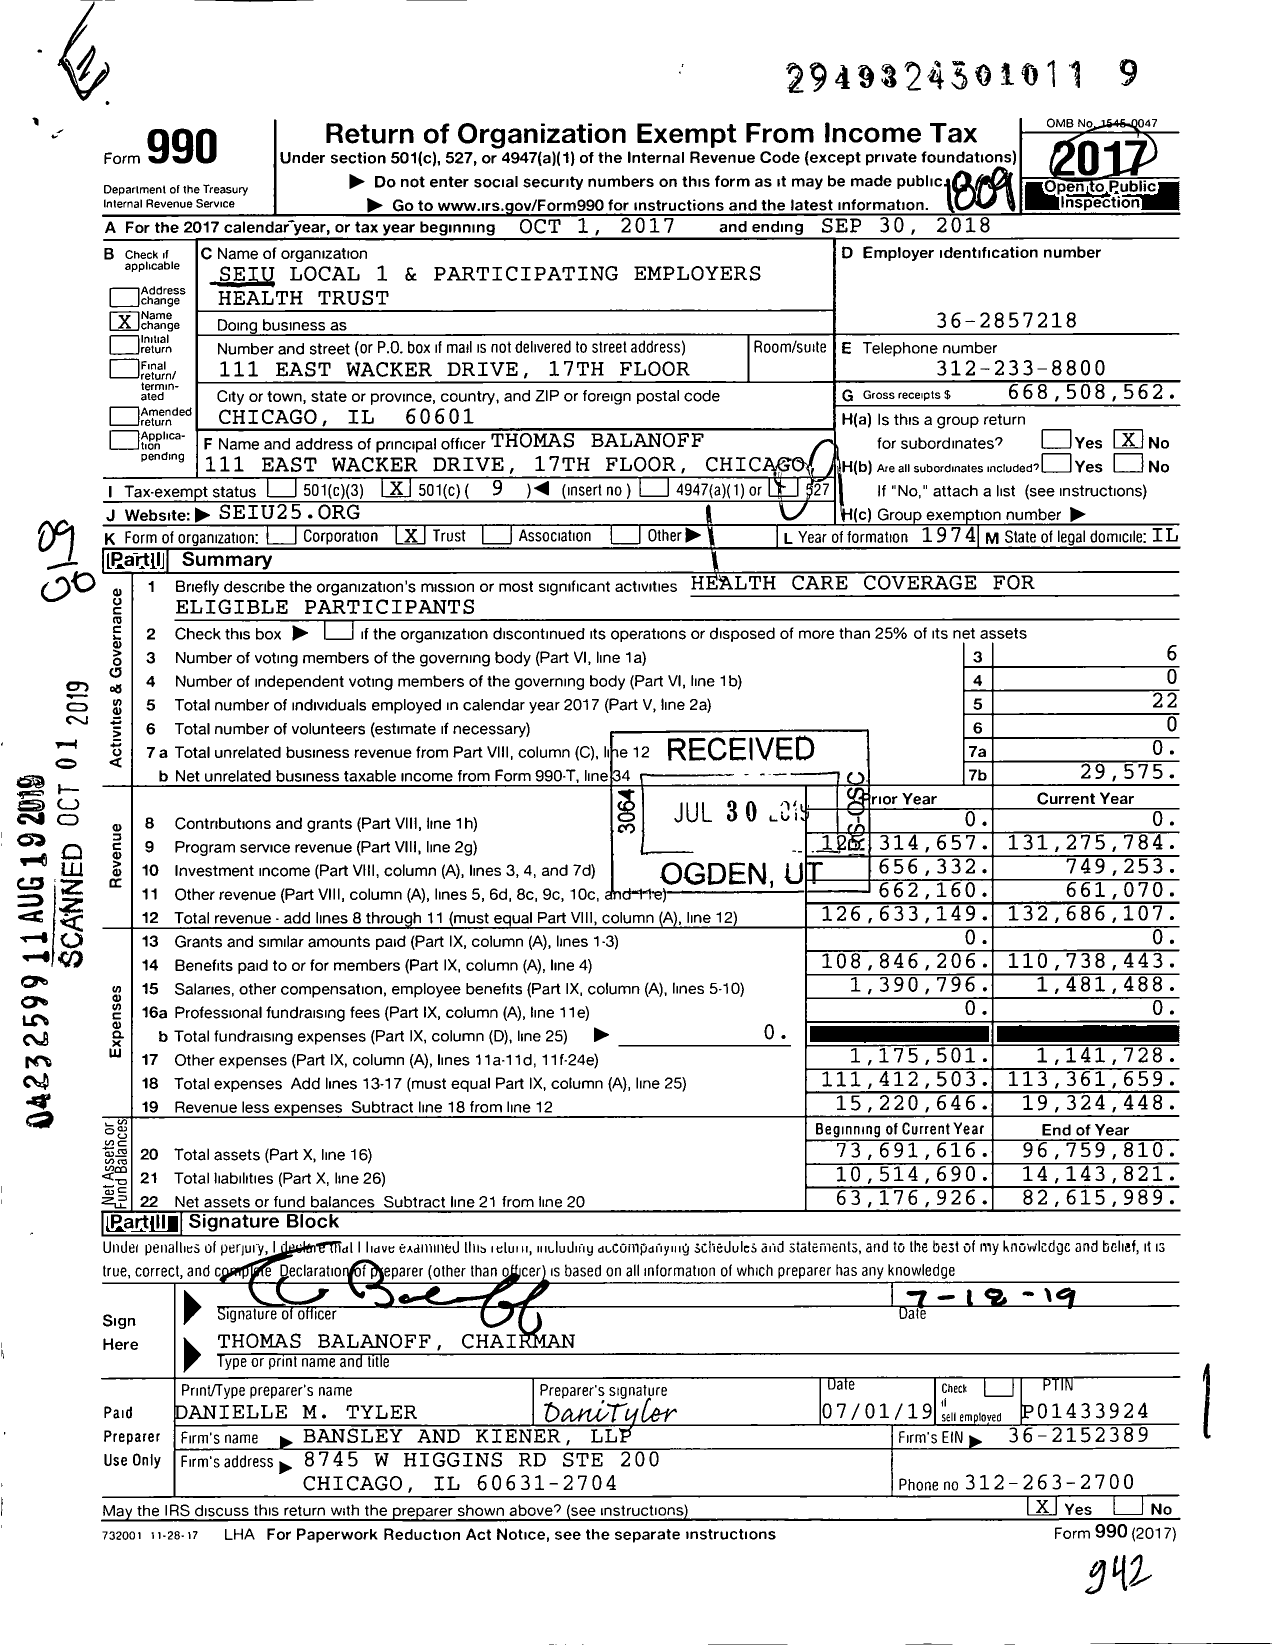 Image of first page of 2017 Form 990O for Seiu Local 1 and Participating Employers Health Trust